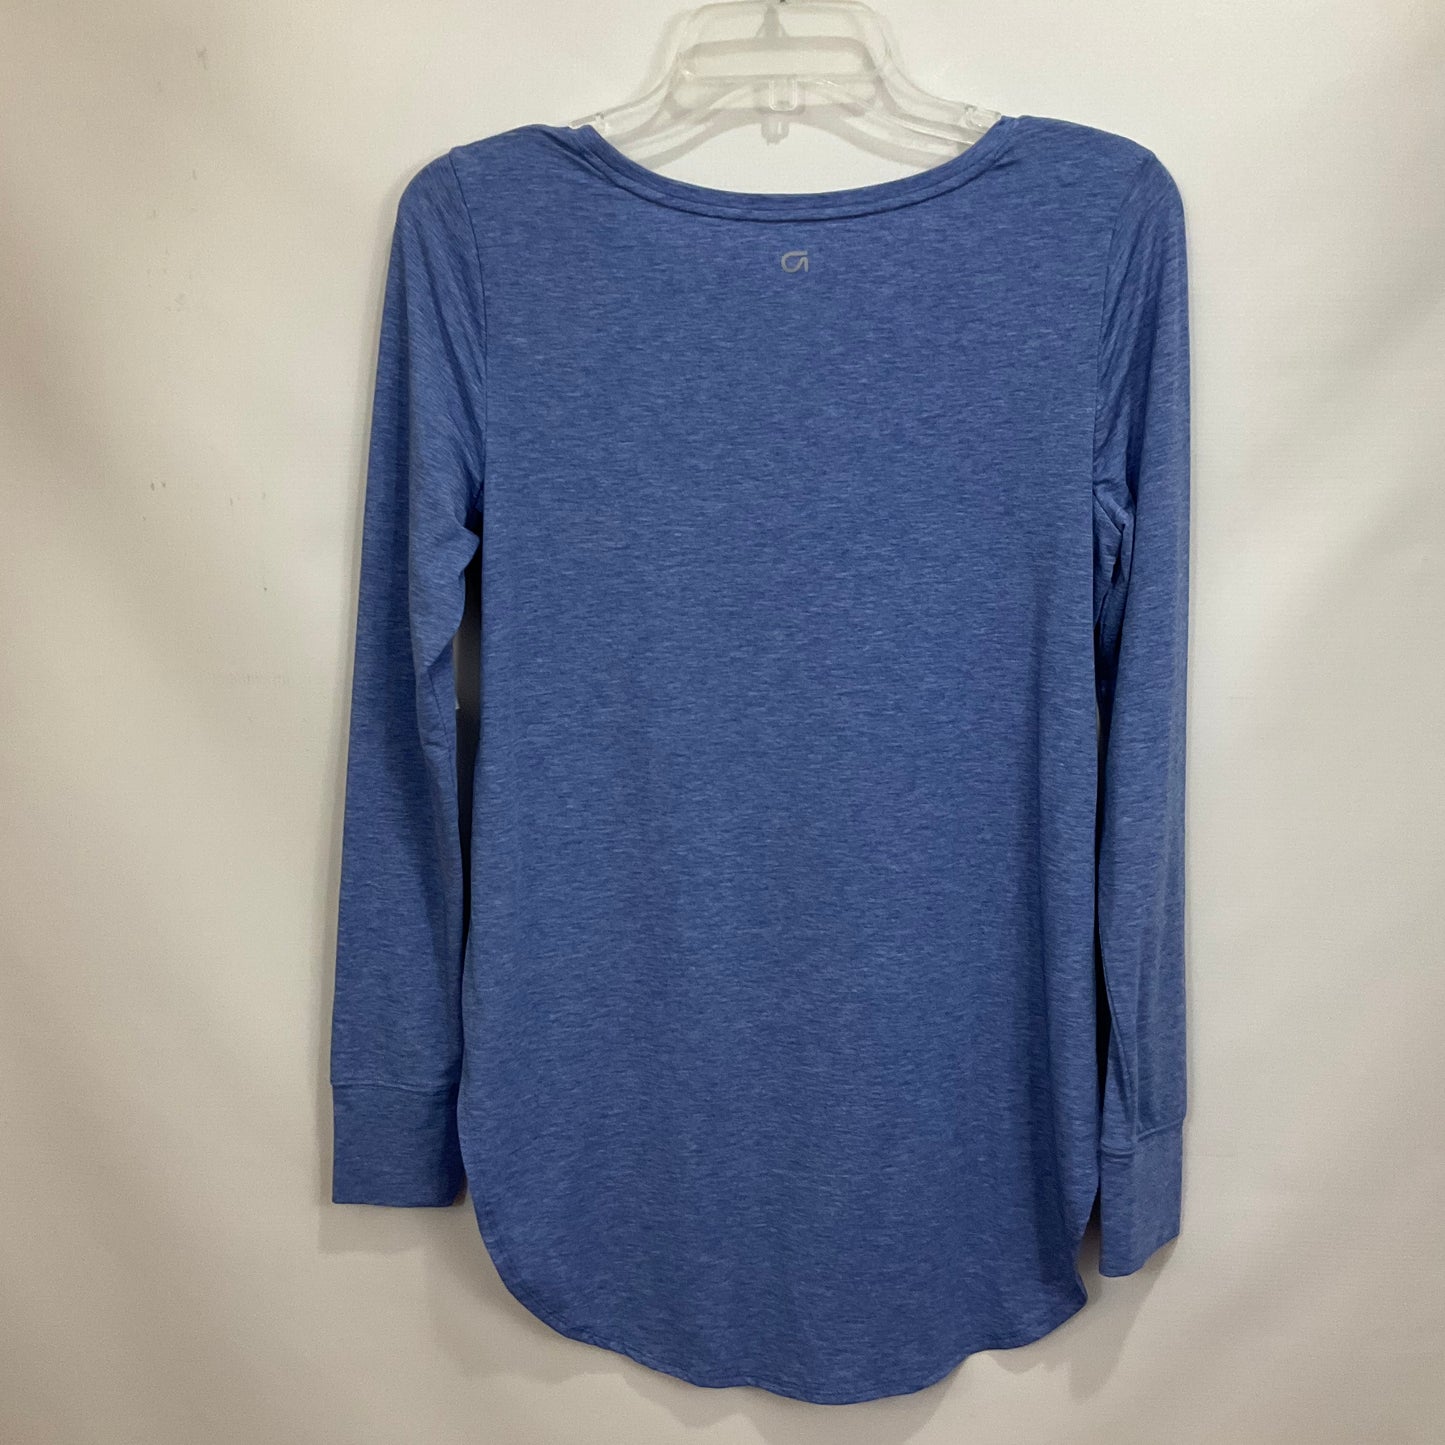 Athletic Top Long Sleeve Crewneck By Gapfit  Size: Xs